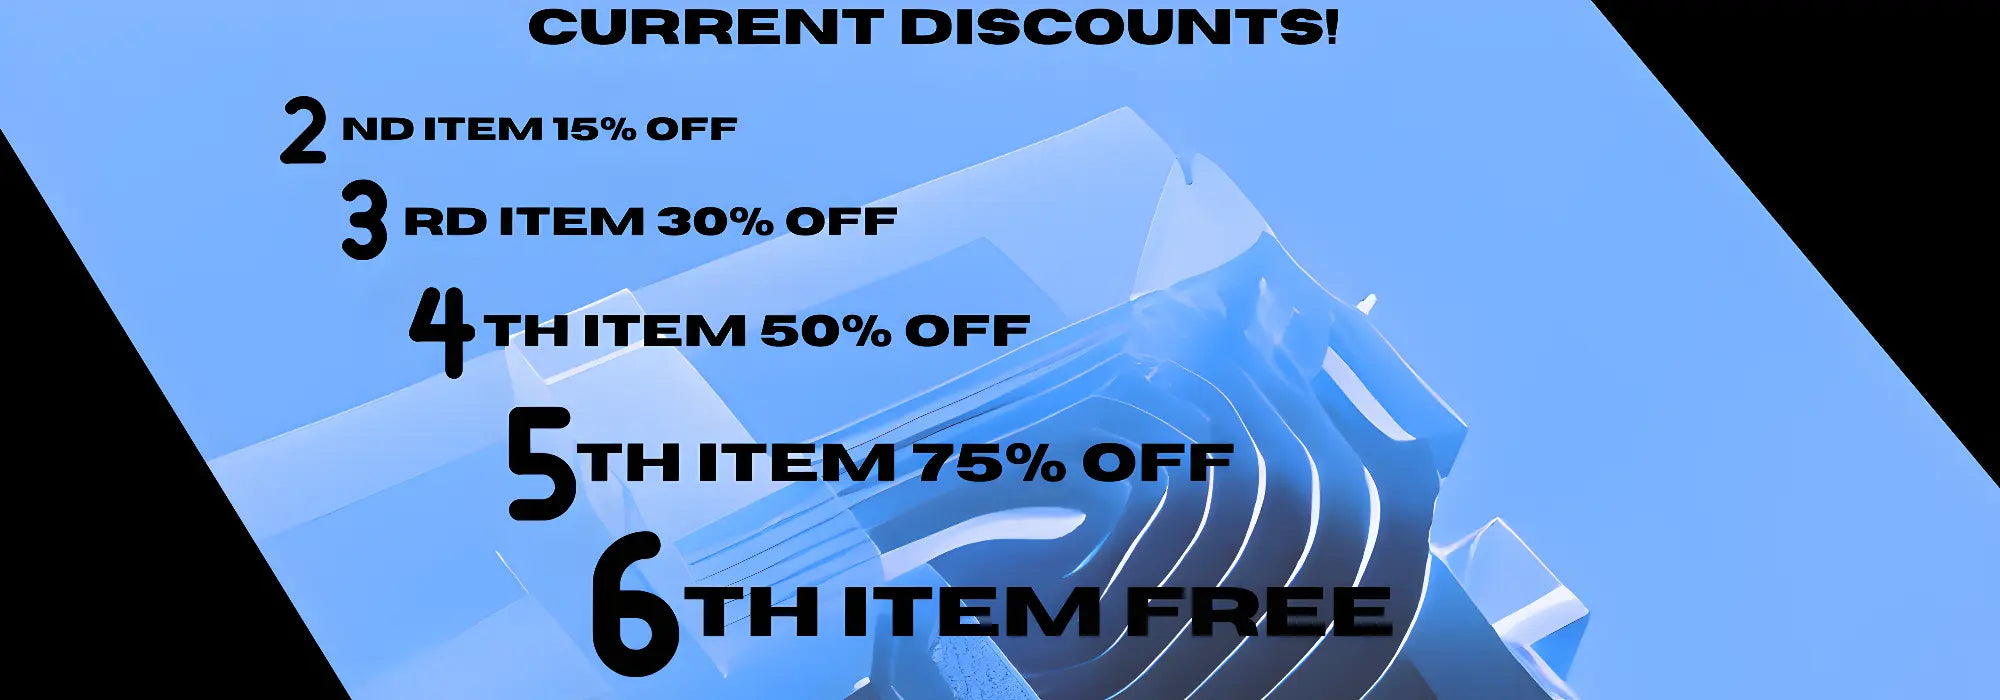 latest banner showing our discounts